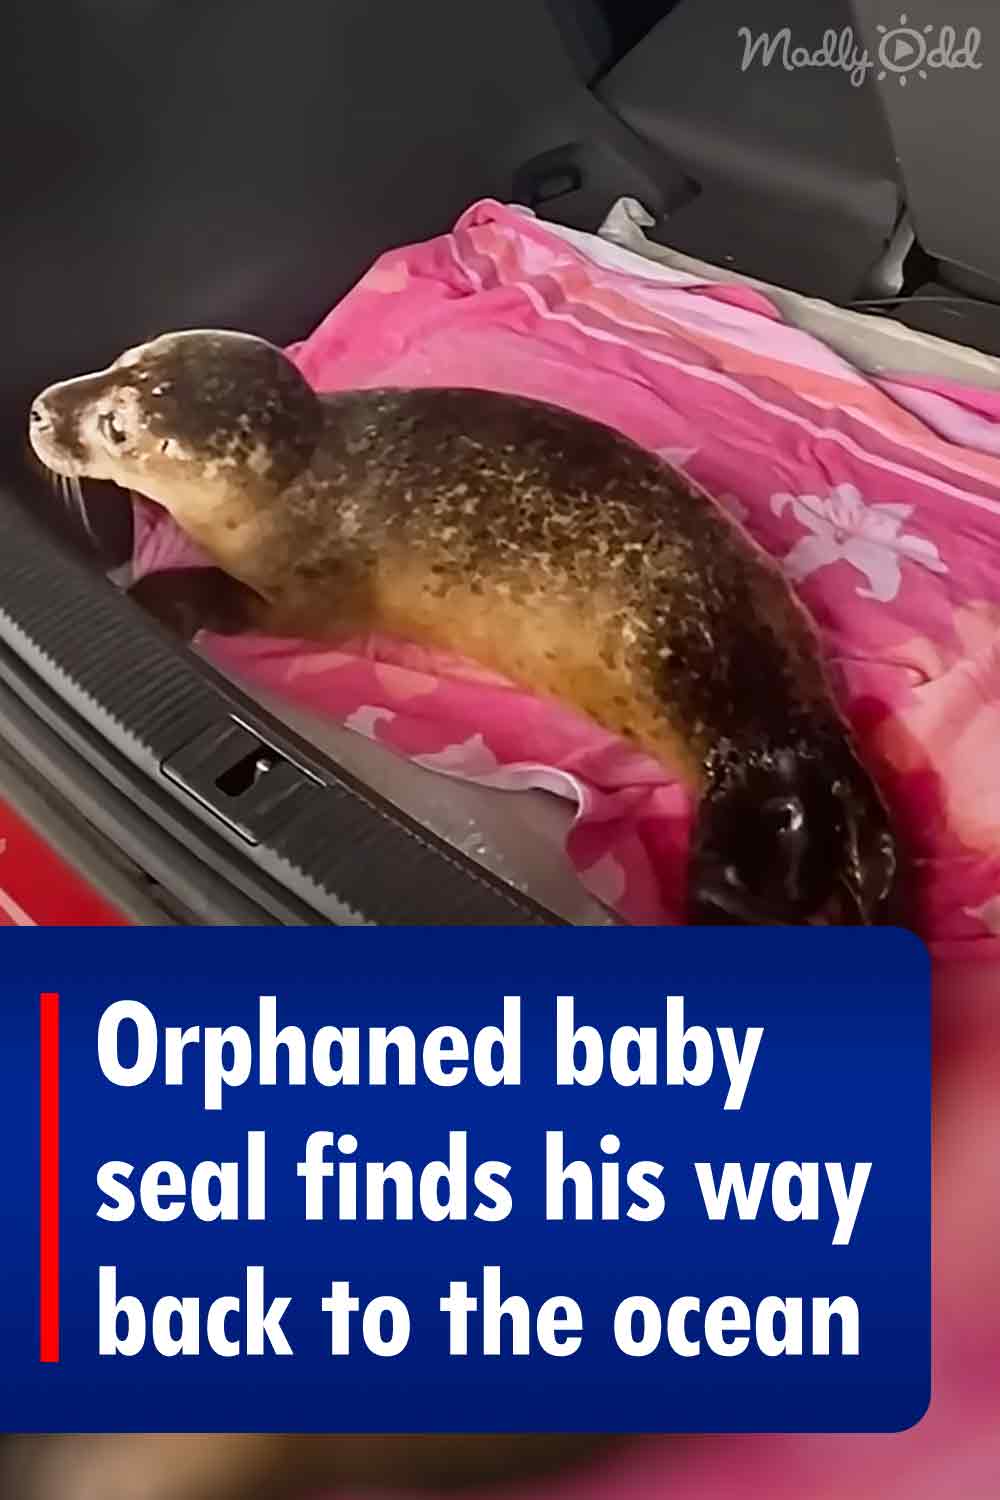 Orphaned baby seal finds his way back to the ocean